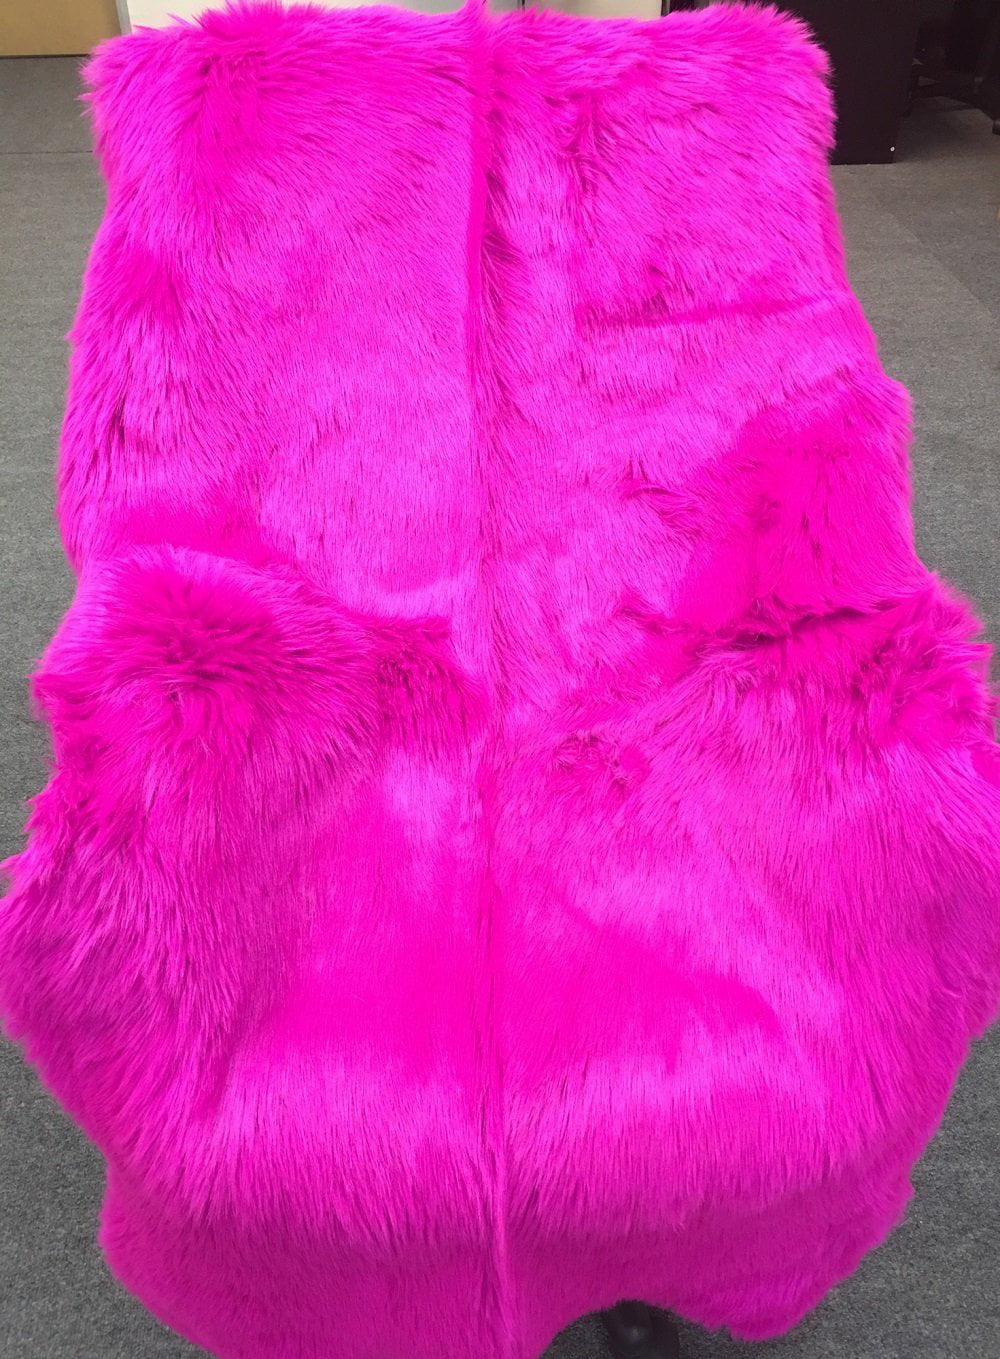 Deluxe Soft Faux Sheepskin Chair Cover, Hot Pink Fur Rug